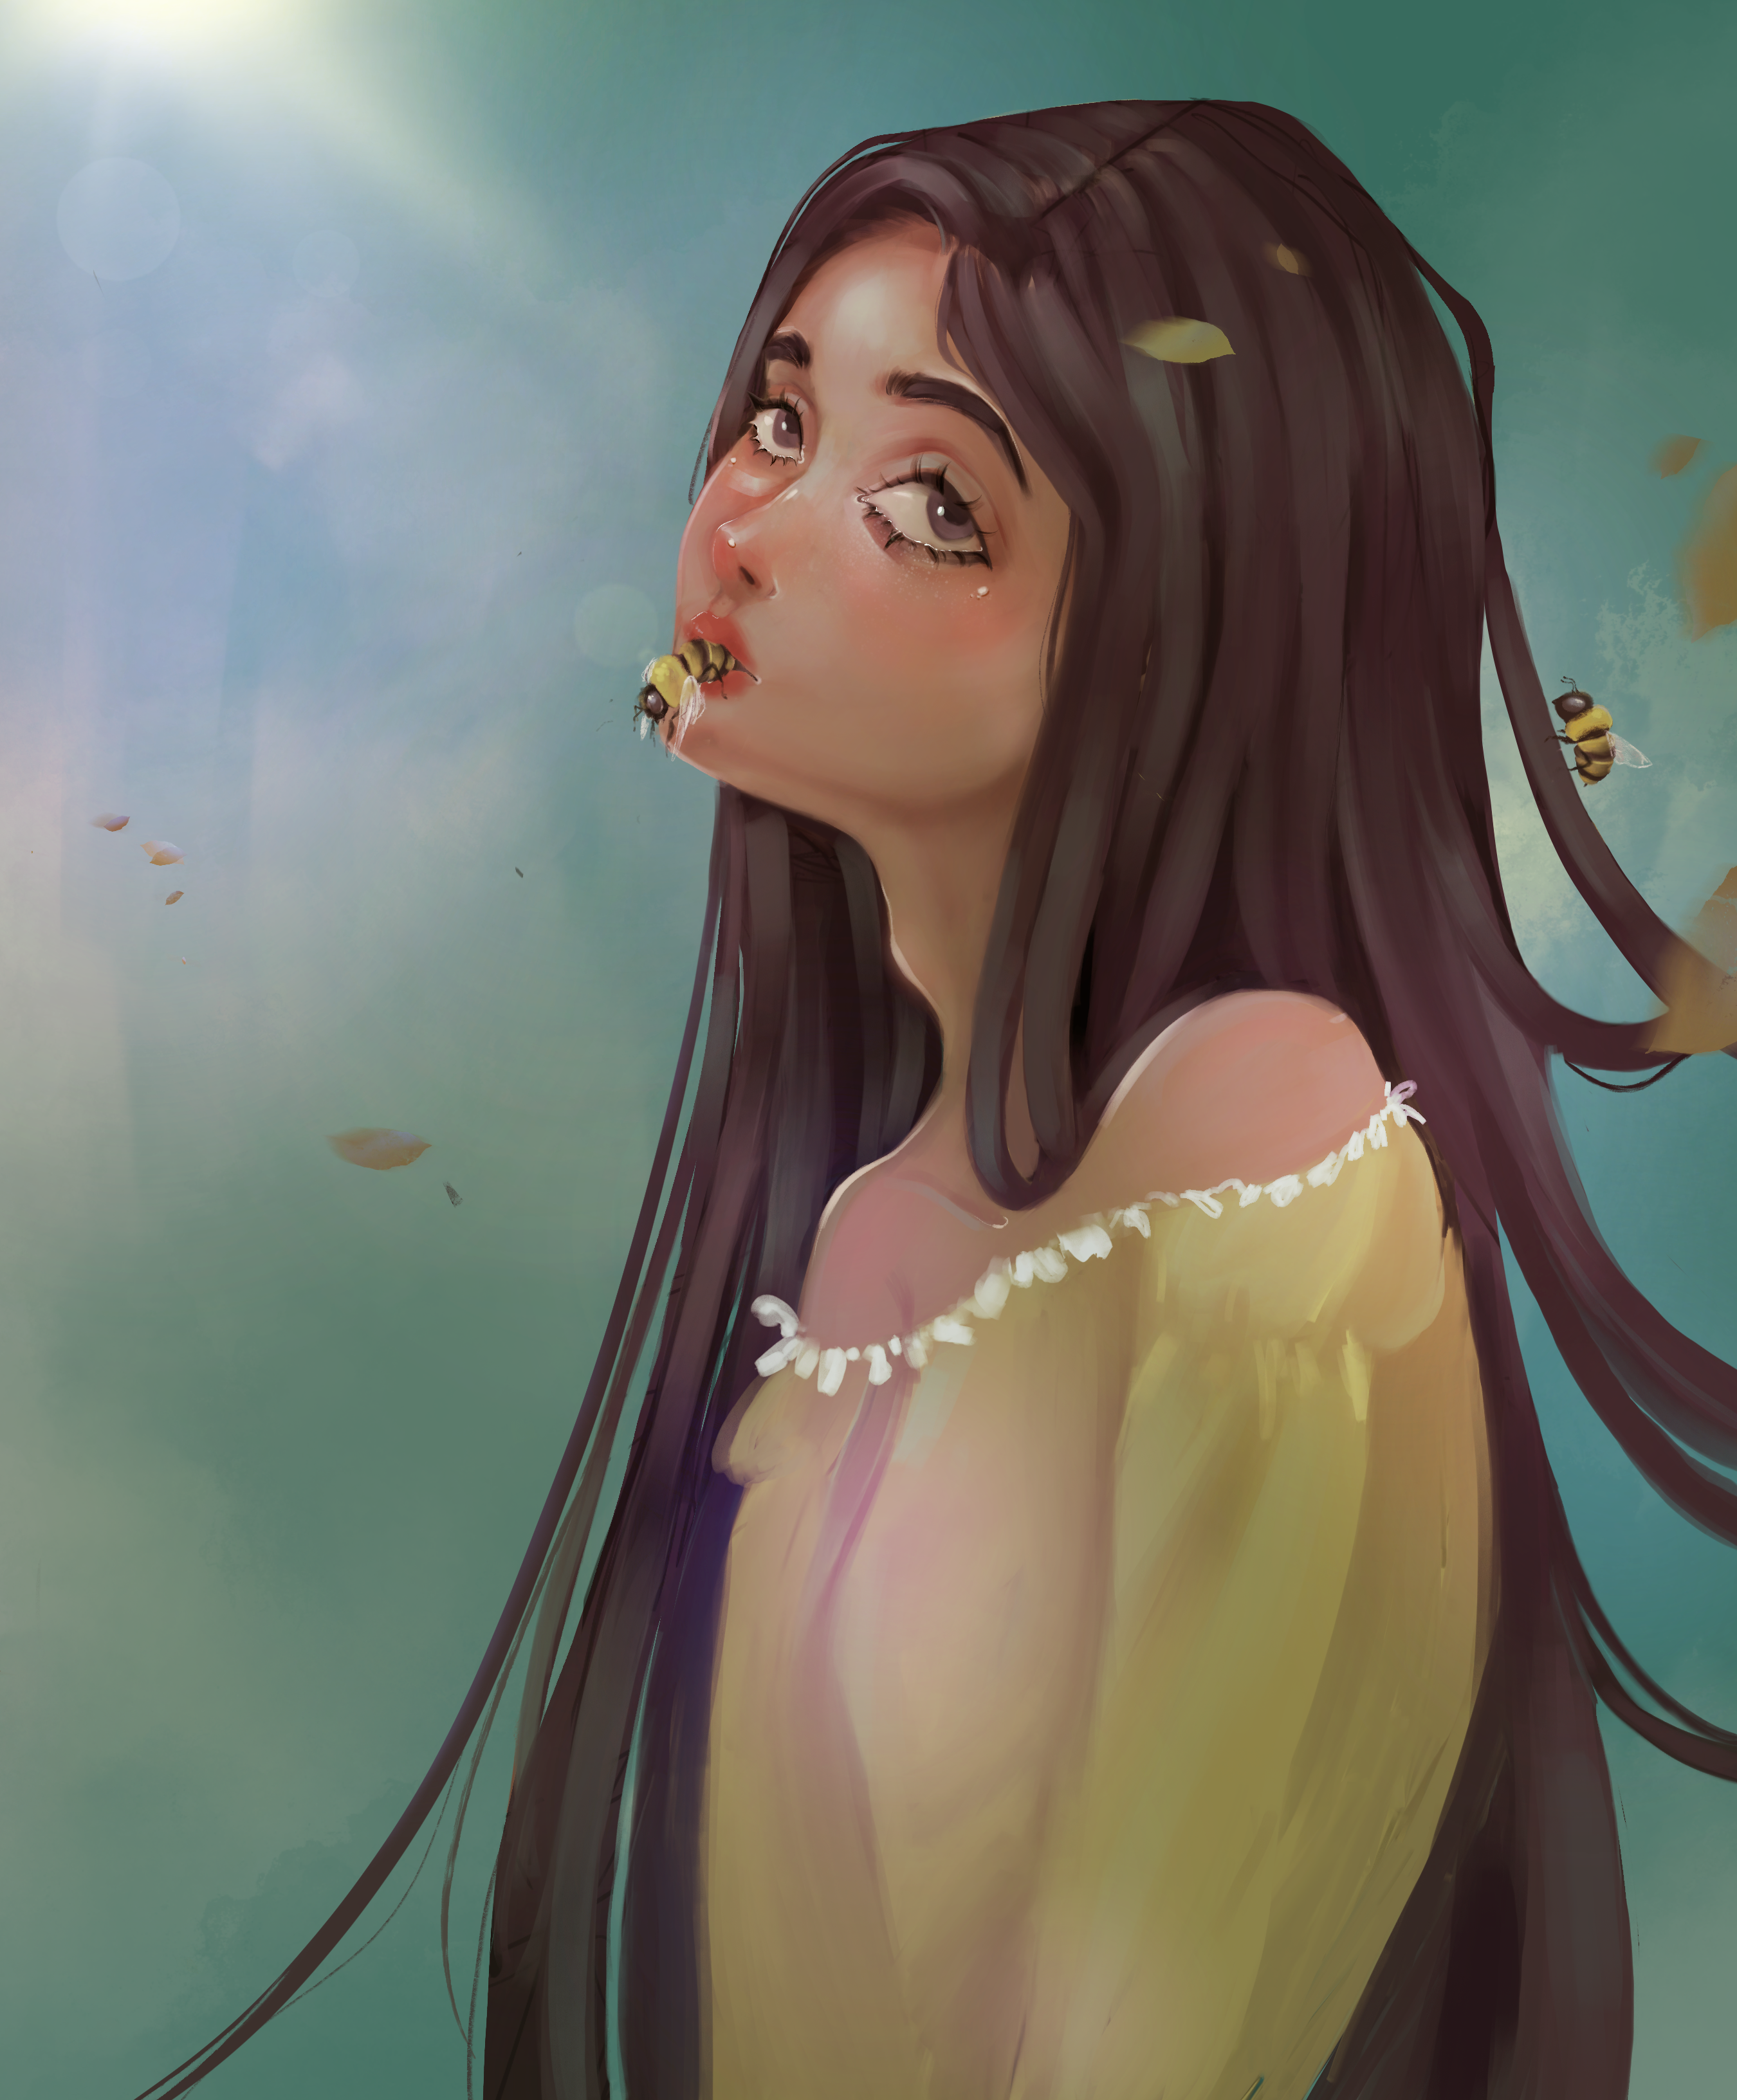 A digital drawing of a girl in yellow dress swallowing a bee